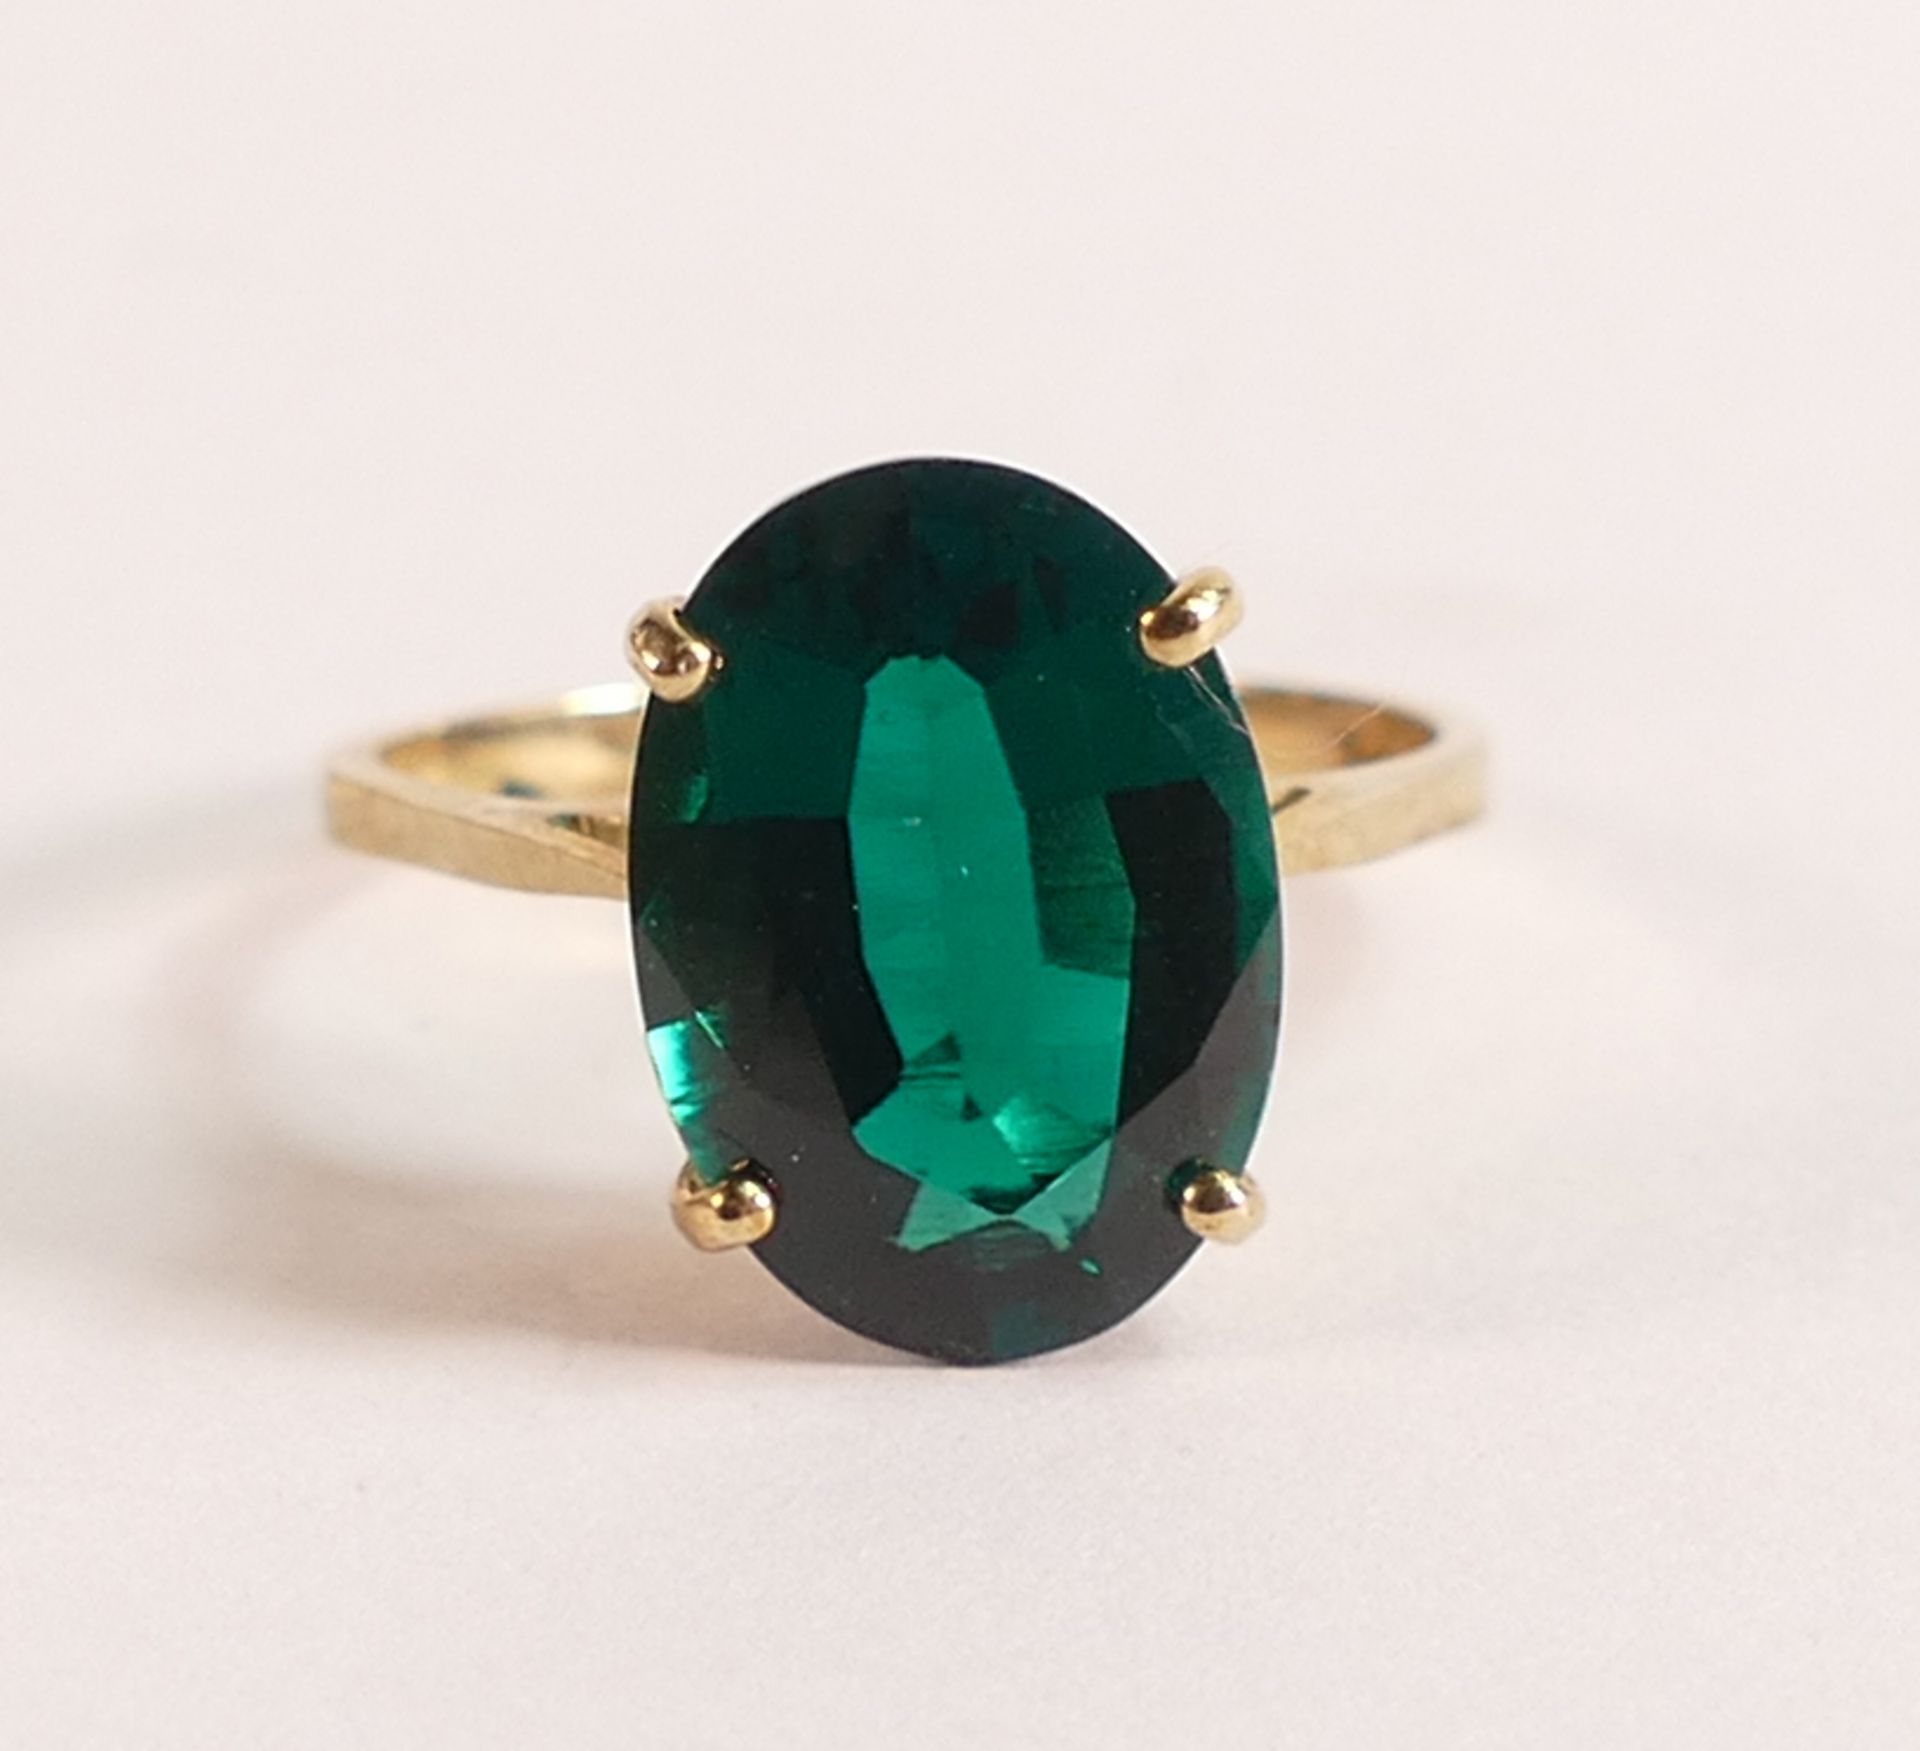 26 Lab Grown Emerald Valiant Ring 4.5 ct in 375 9ct Gold - This exceptional ring needs little